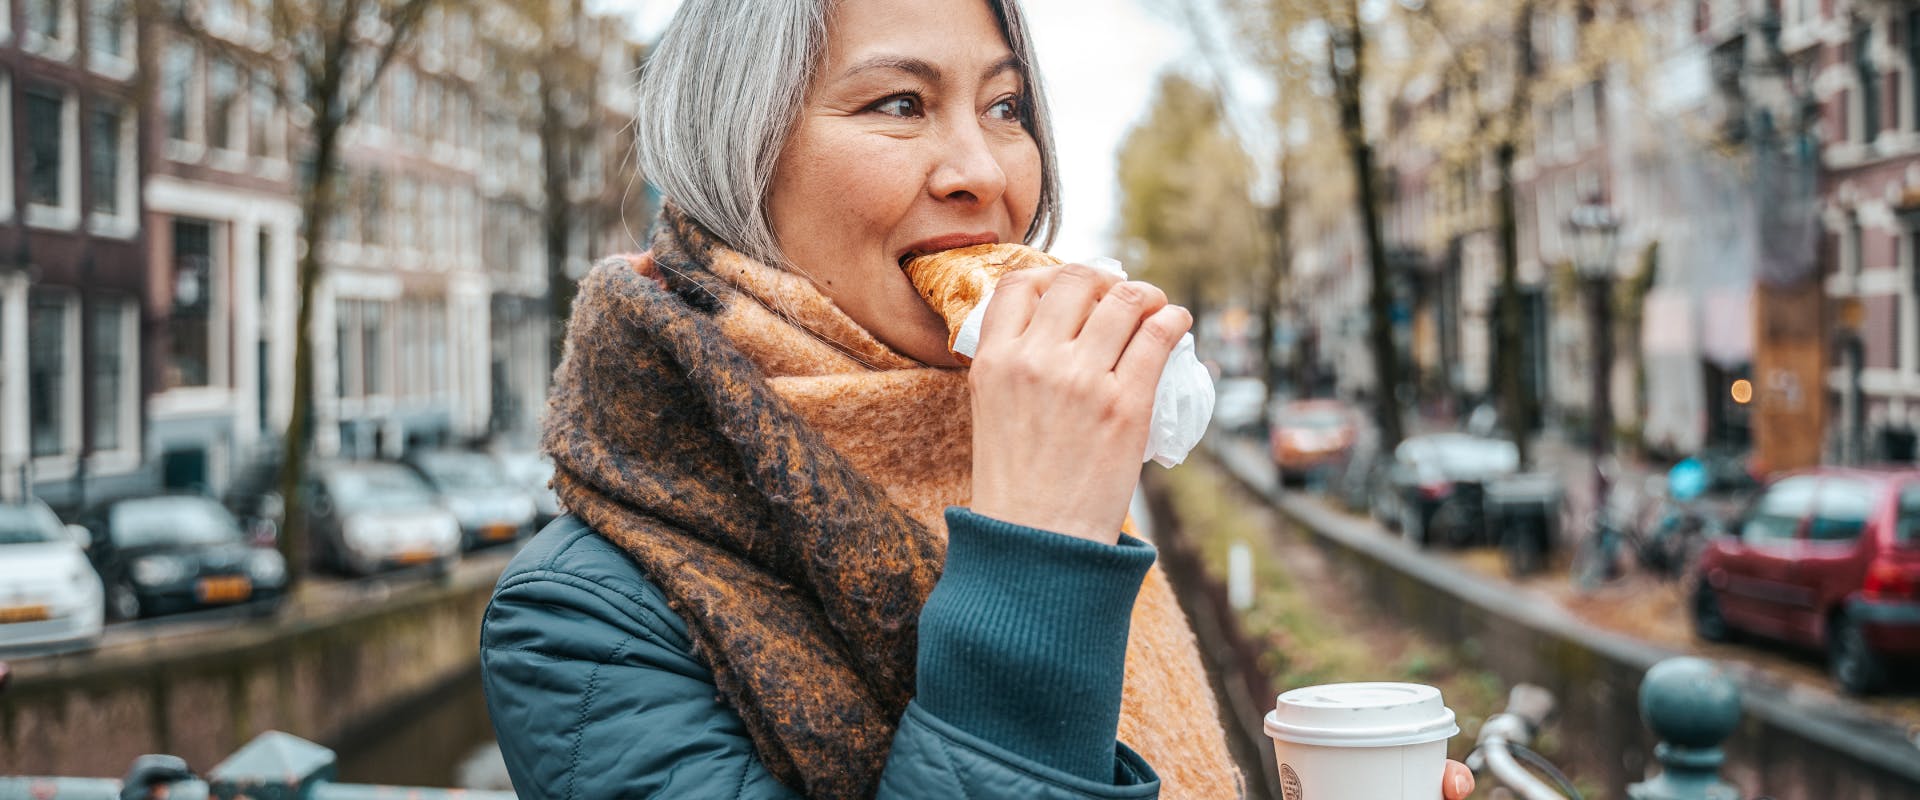 A woman eats a pastry in Amsterdam.